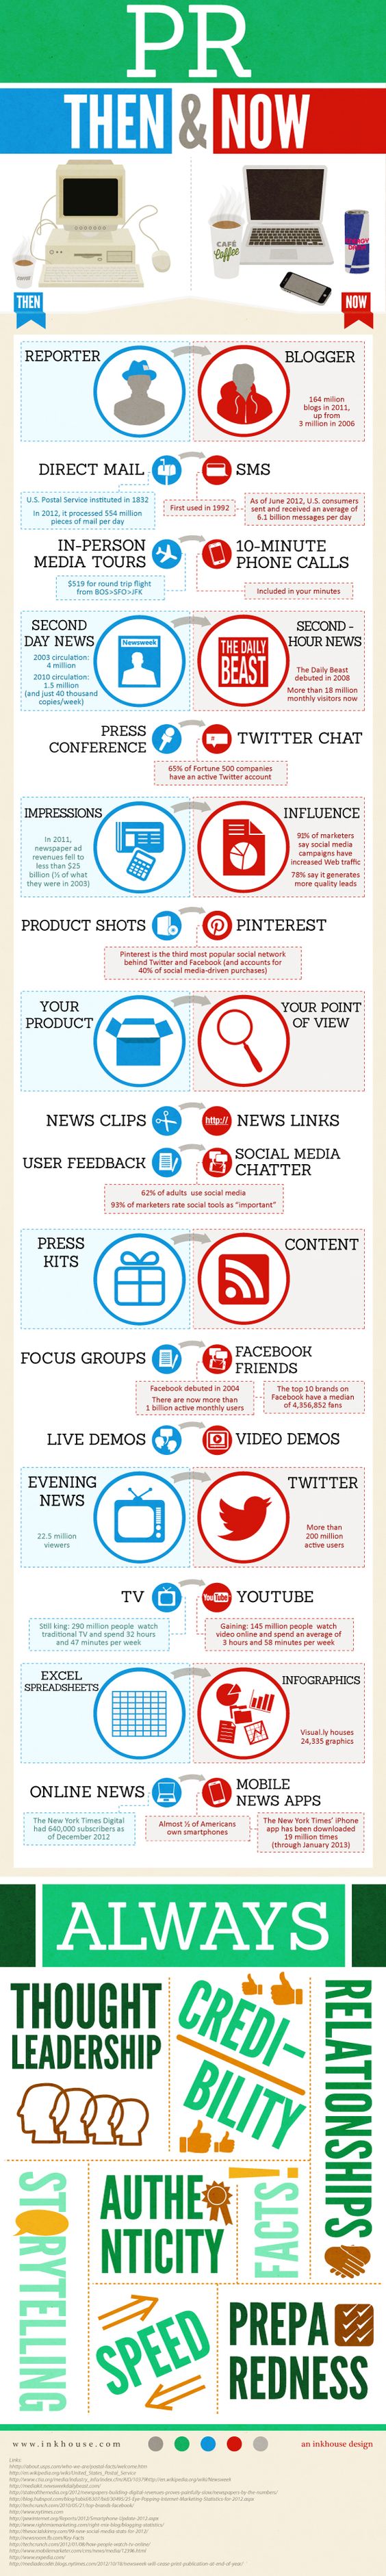 Social Media & PR: Then & Now. Great infographic detailing how digital media has shaped the public relations field.